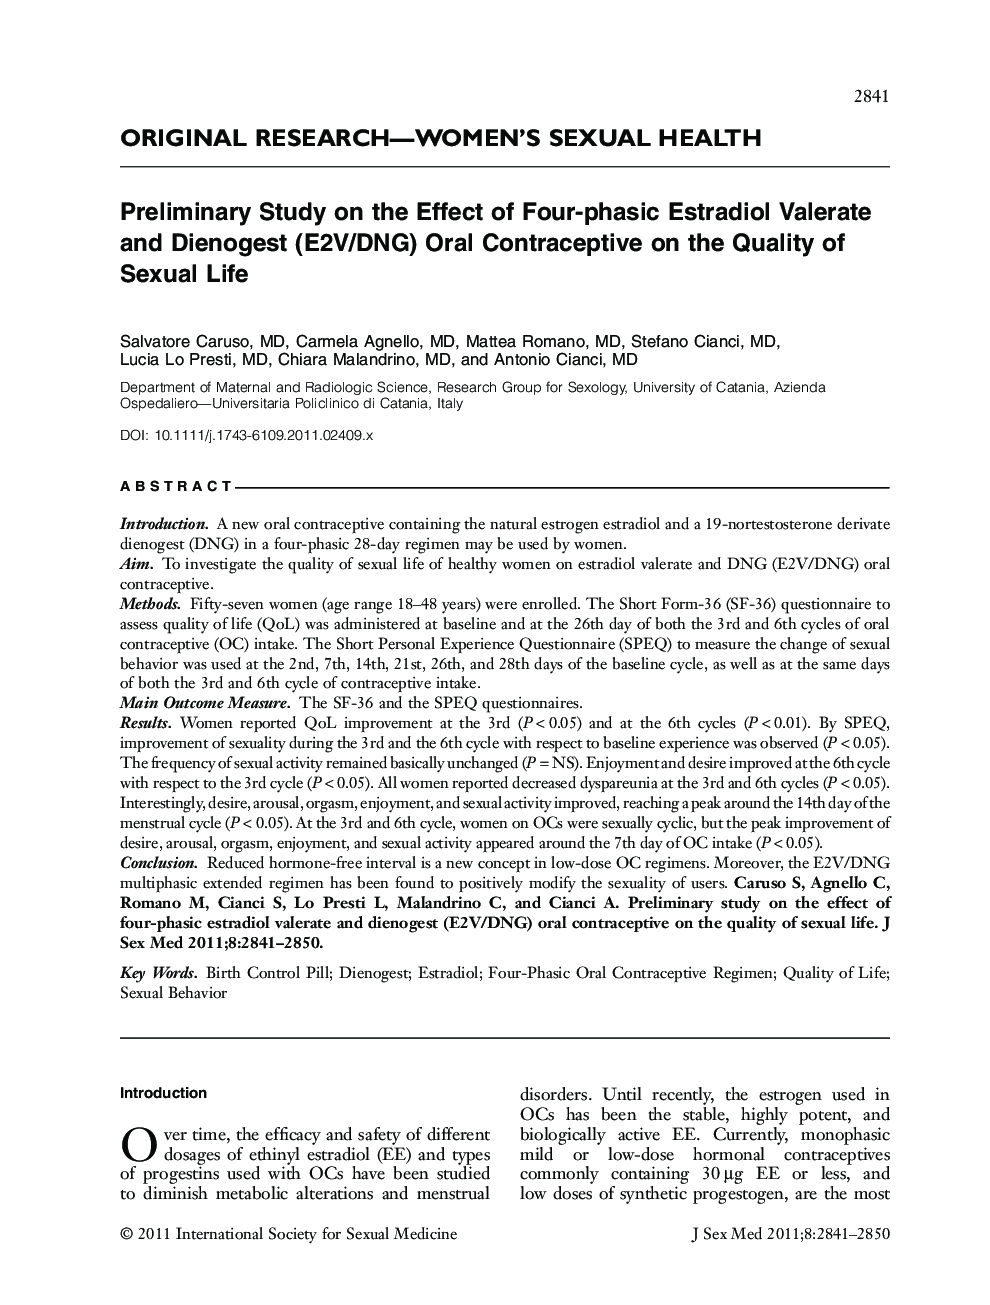 Preliminary Study on the Effect of Fourâphasic Estradiol Valerate and Dienogest (E2V/DNG) Oral Contraceptive on the Quality of Sexual Life